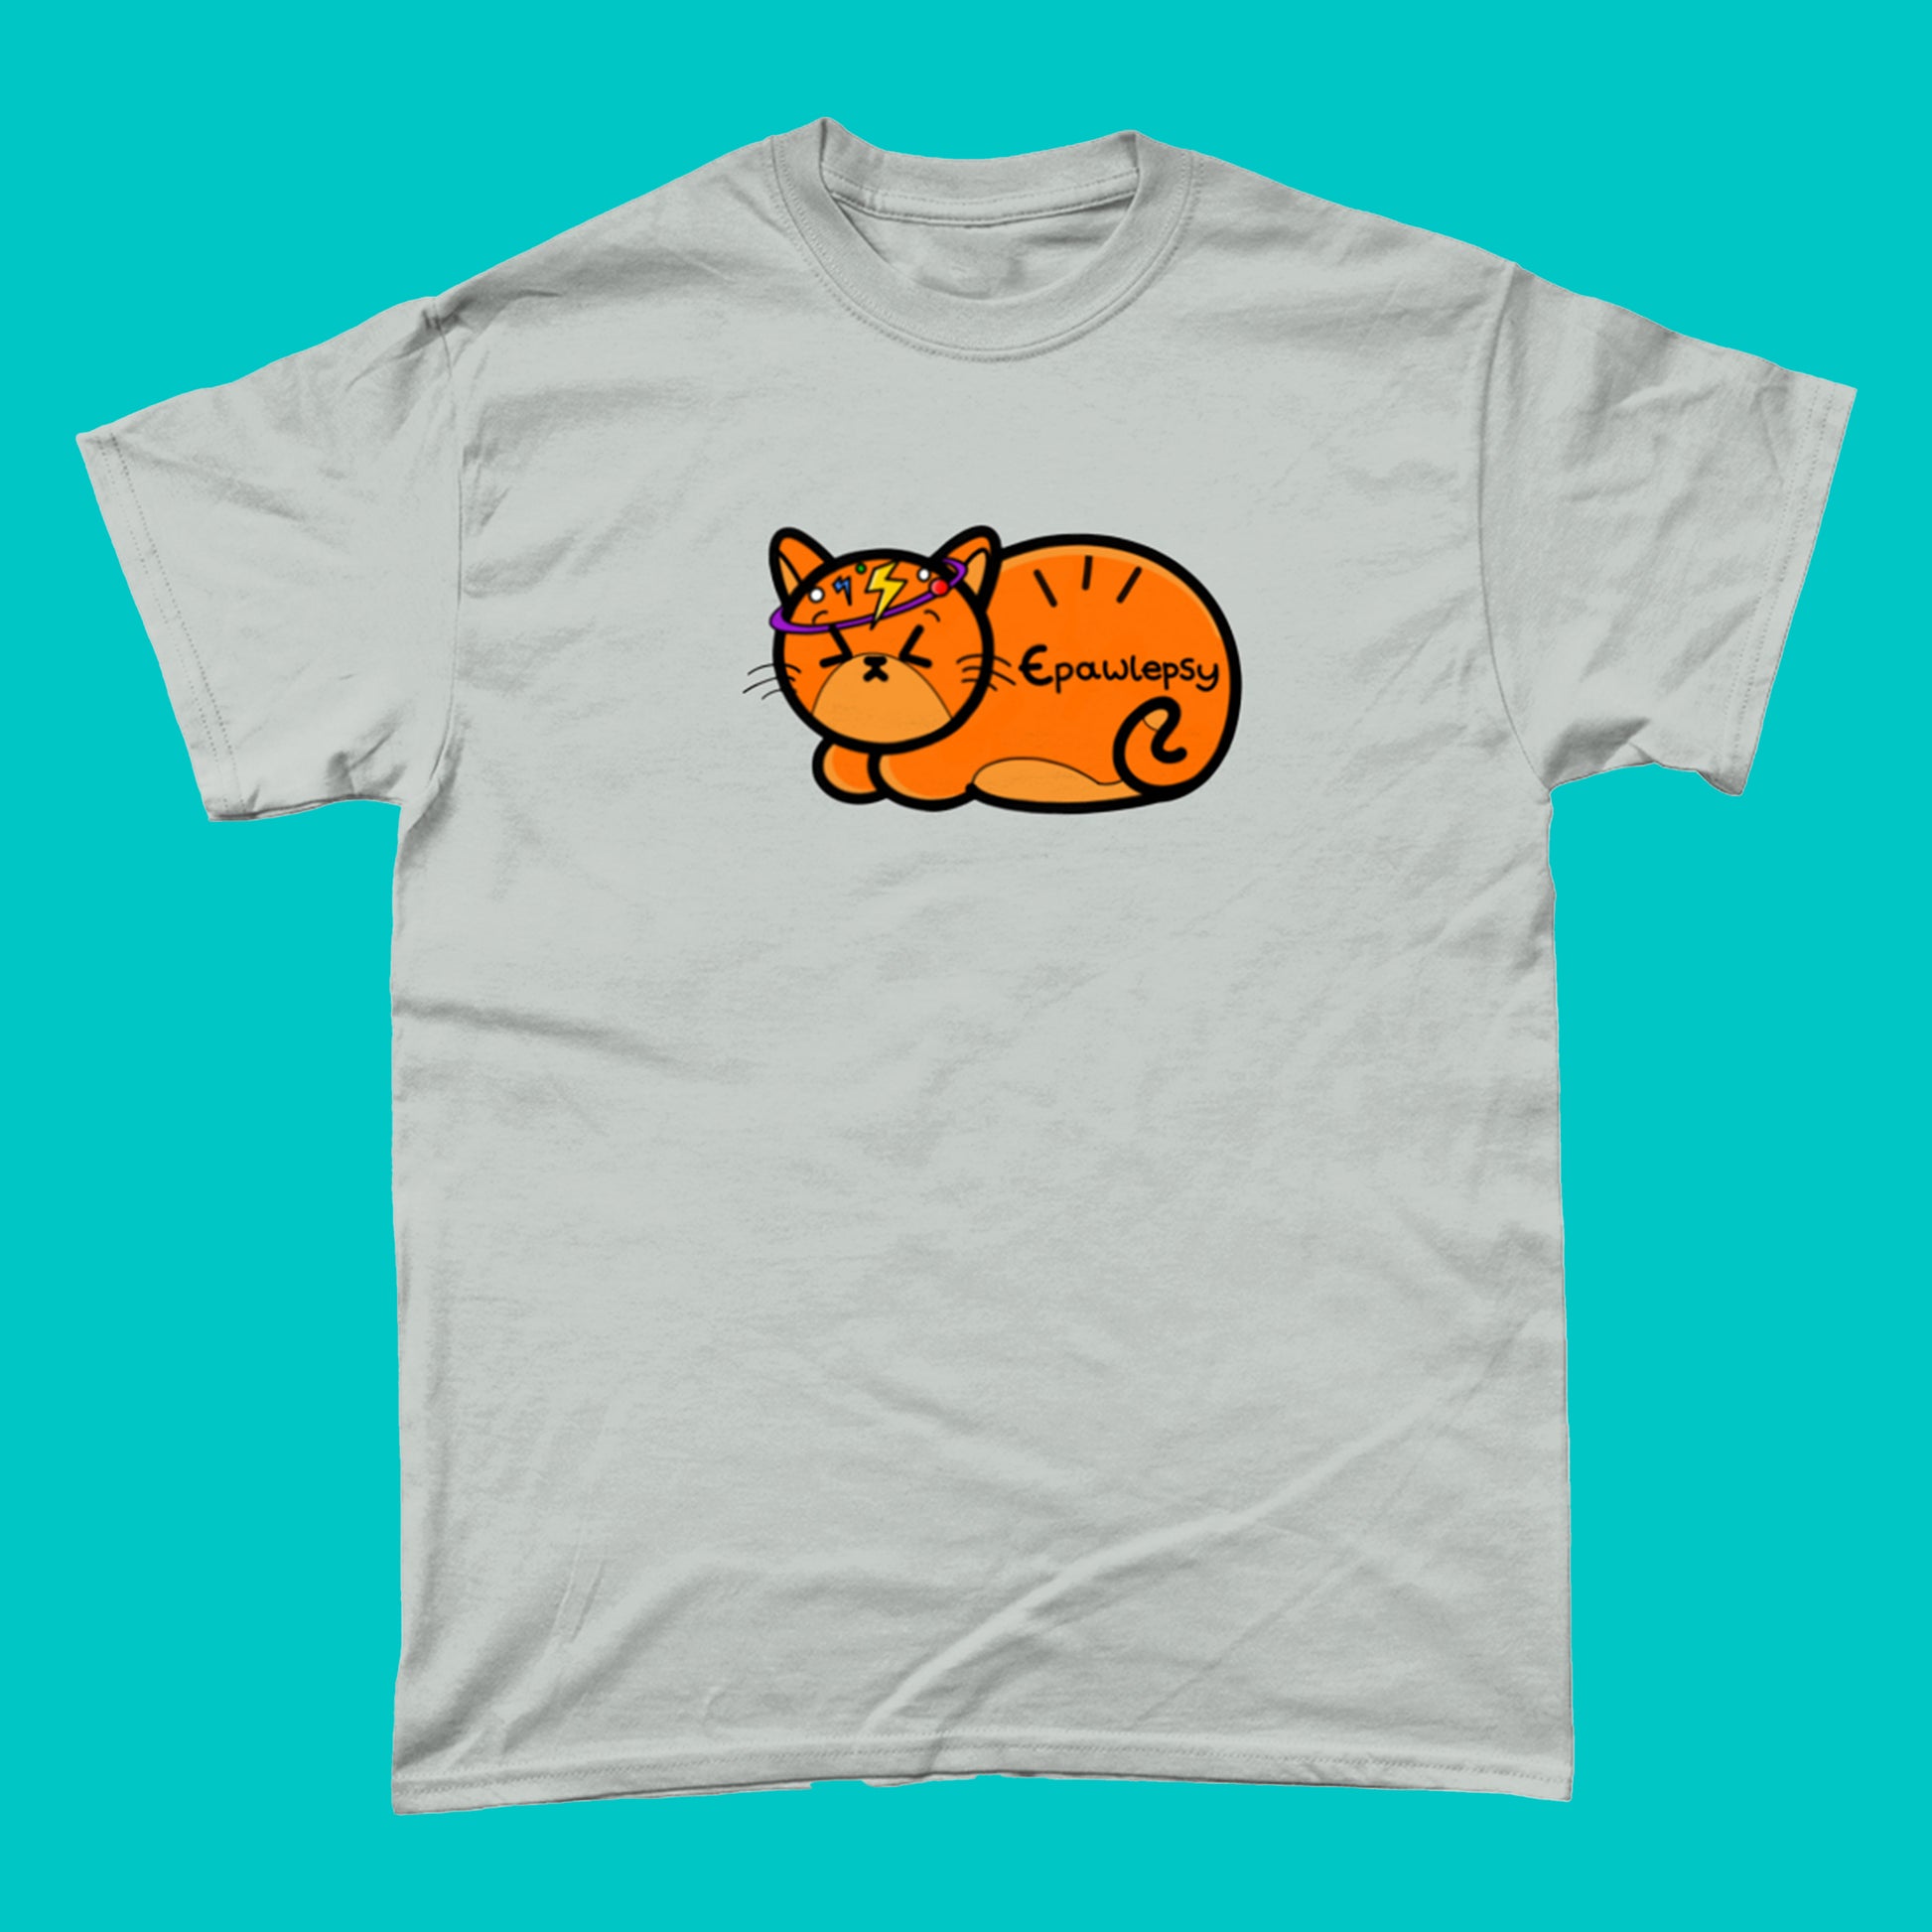 Epawlepsy Tee - Epilepsy. The ash grey cotton t-shirt is a ginger cat with eyes scrunched closed and symbols to represent a dizzy spell drawn across his head. Epawlepsy is written on the cats stomach. Tee is designed to raise awareness for epilepsy.